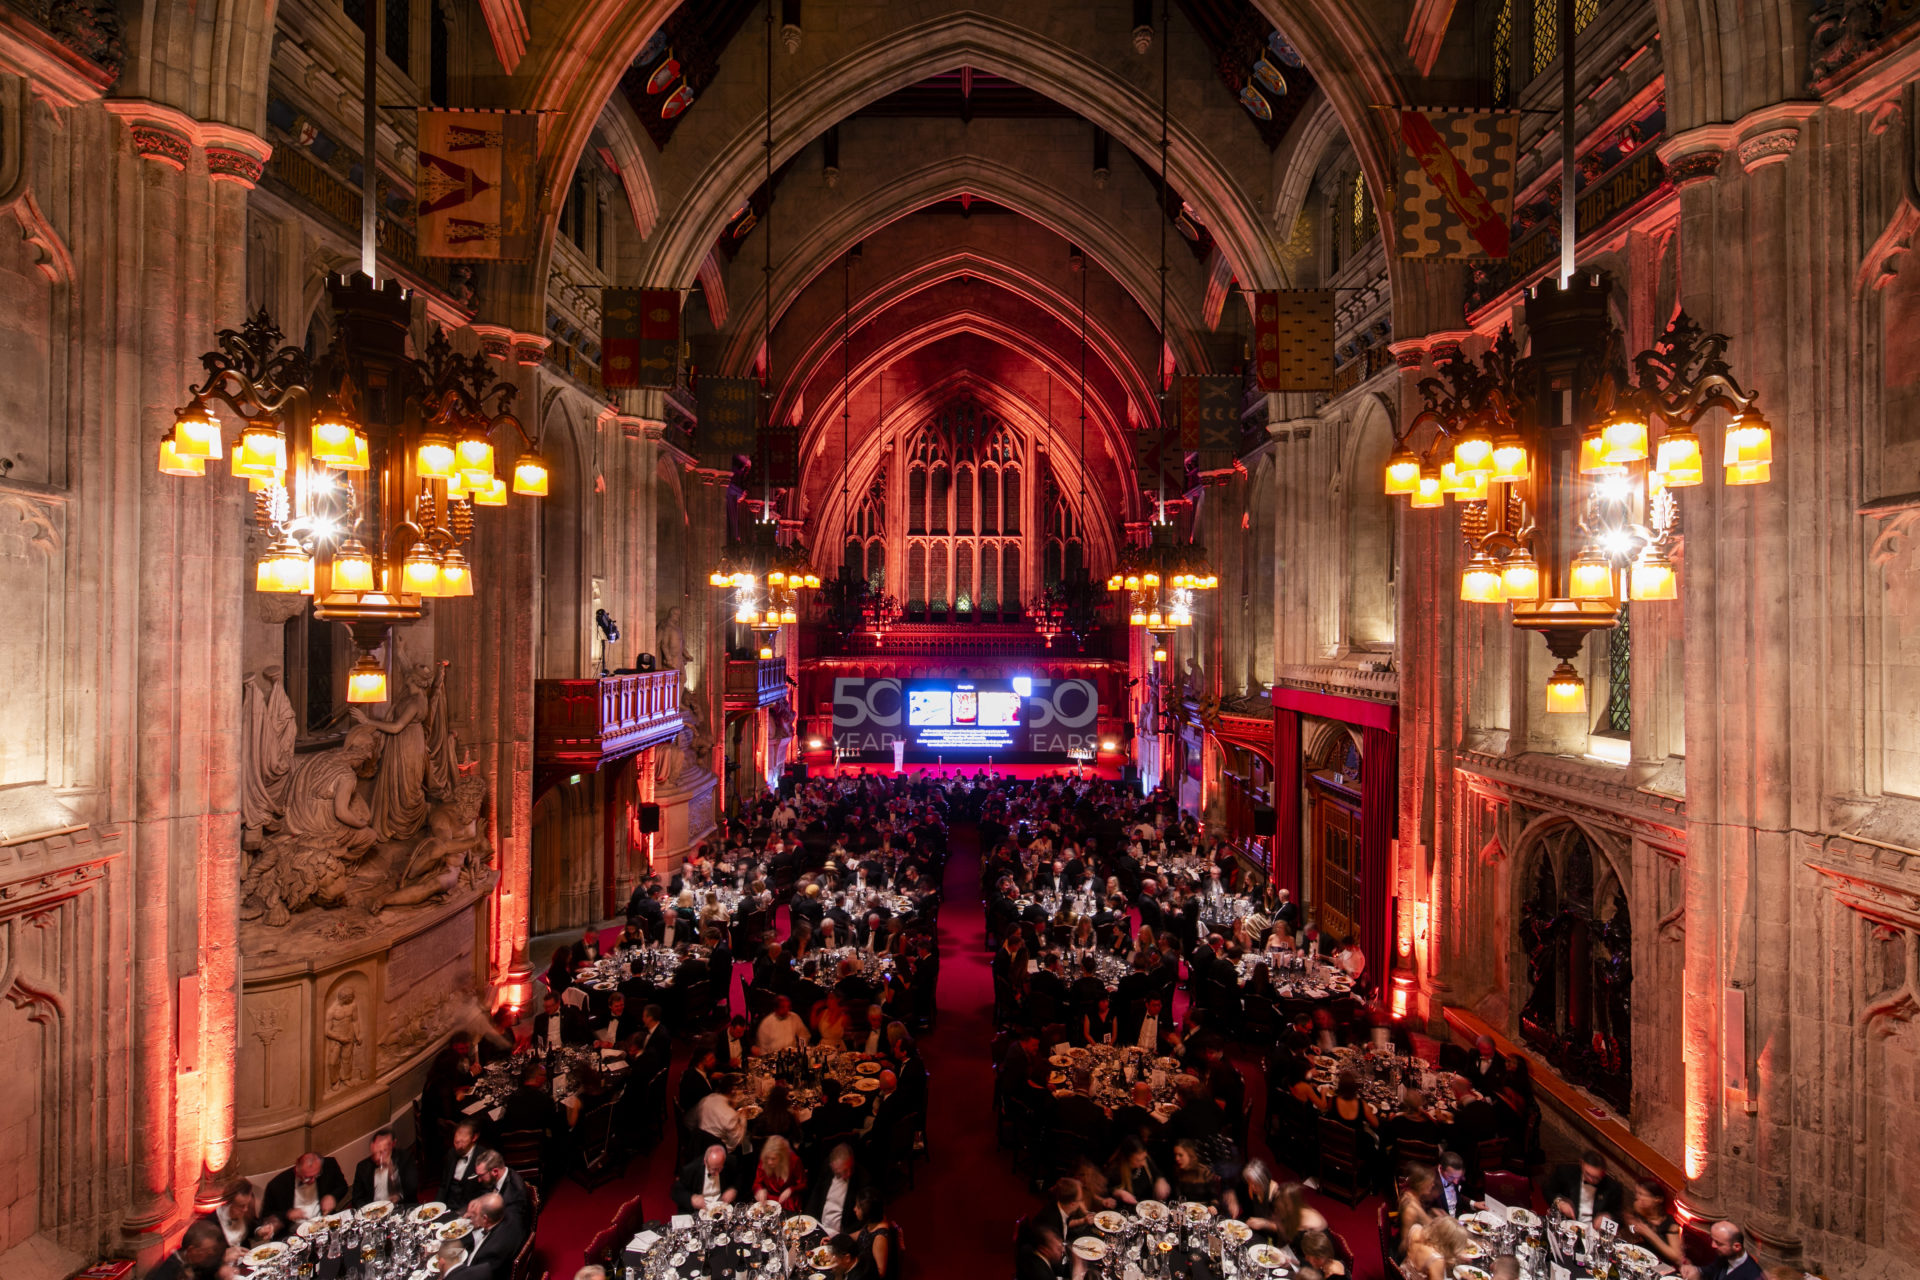 C&S at the IWSC 50th anniversary Awards Banquet, held at the Guildhall